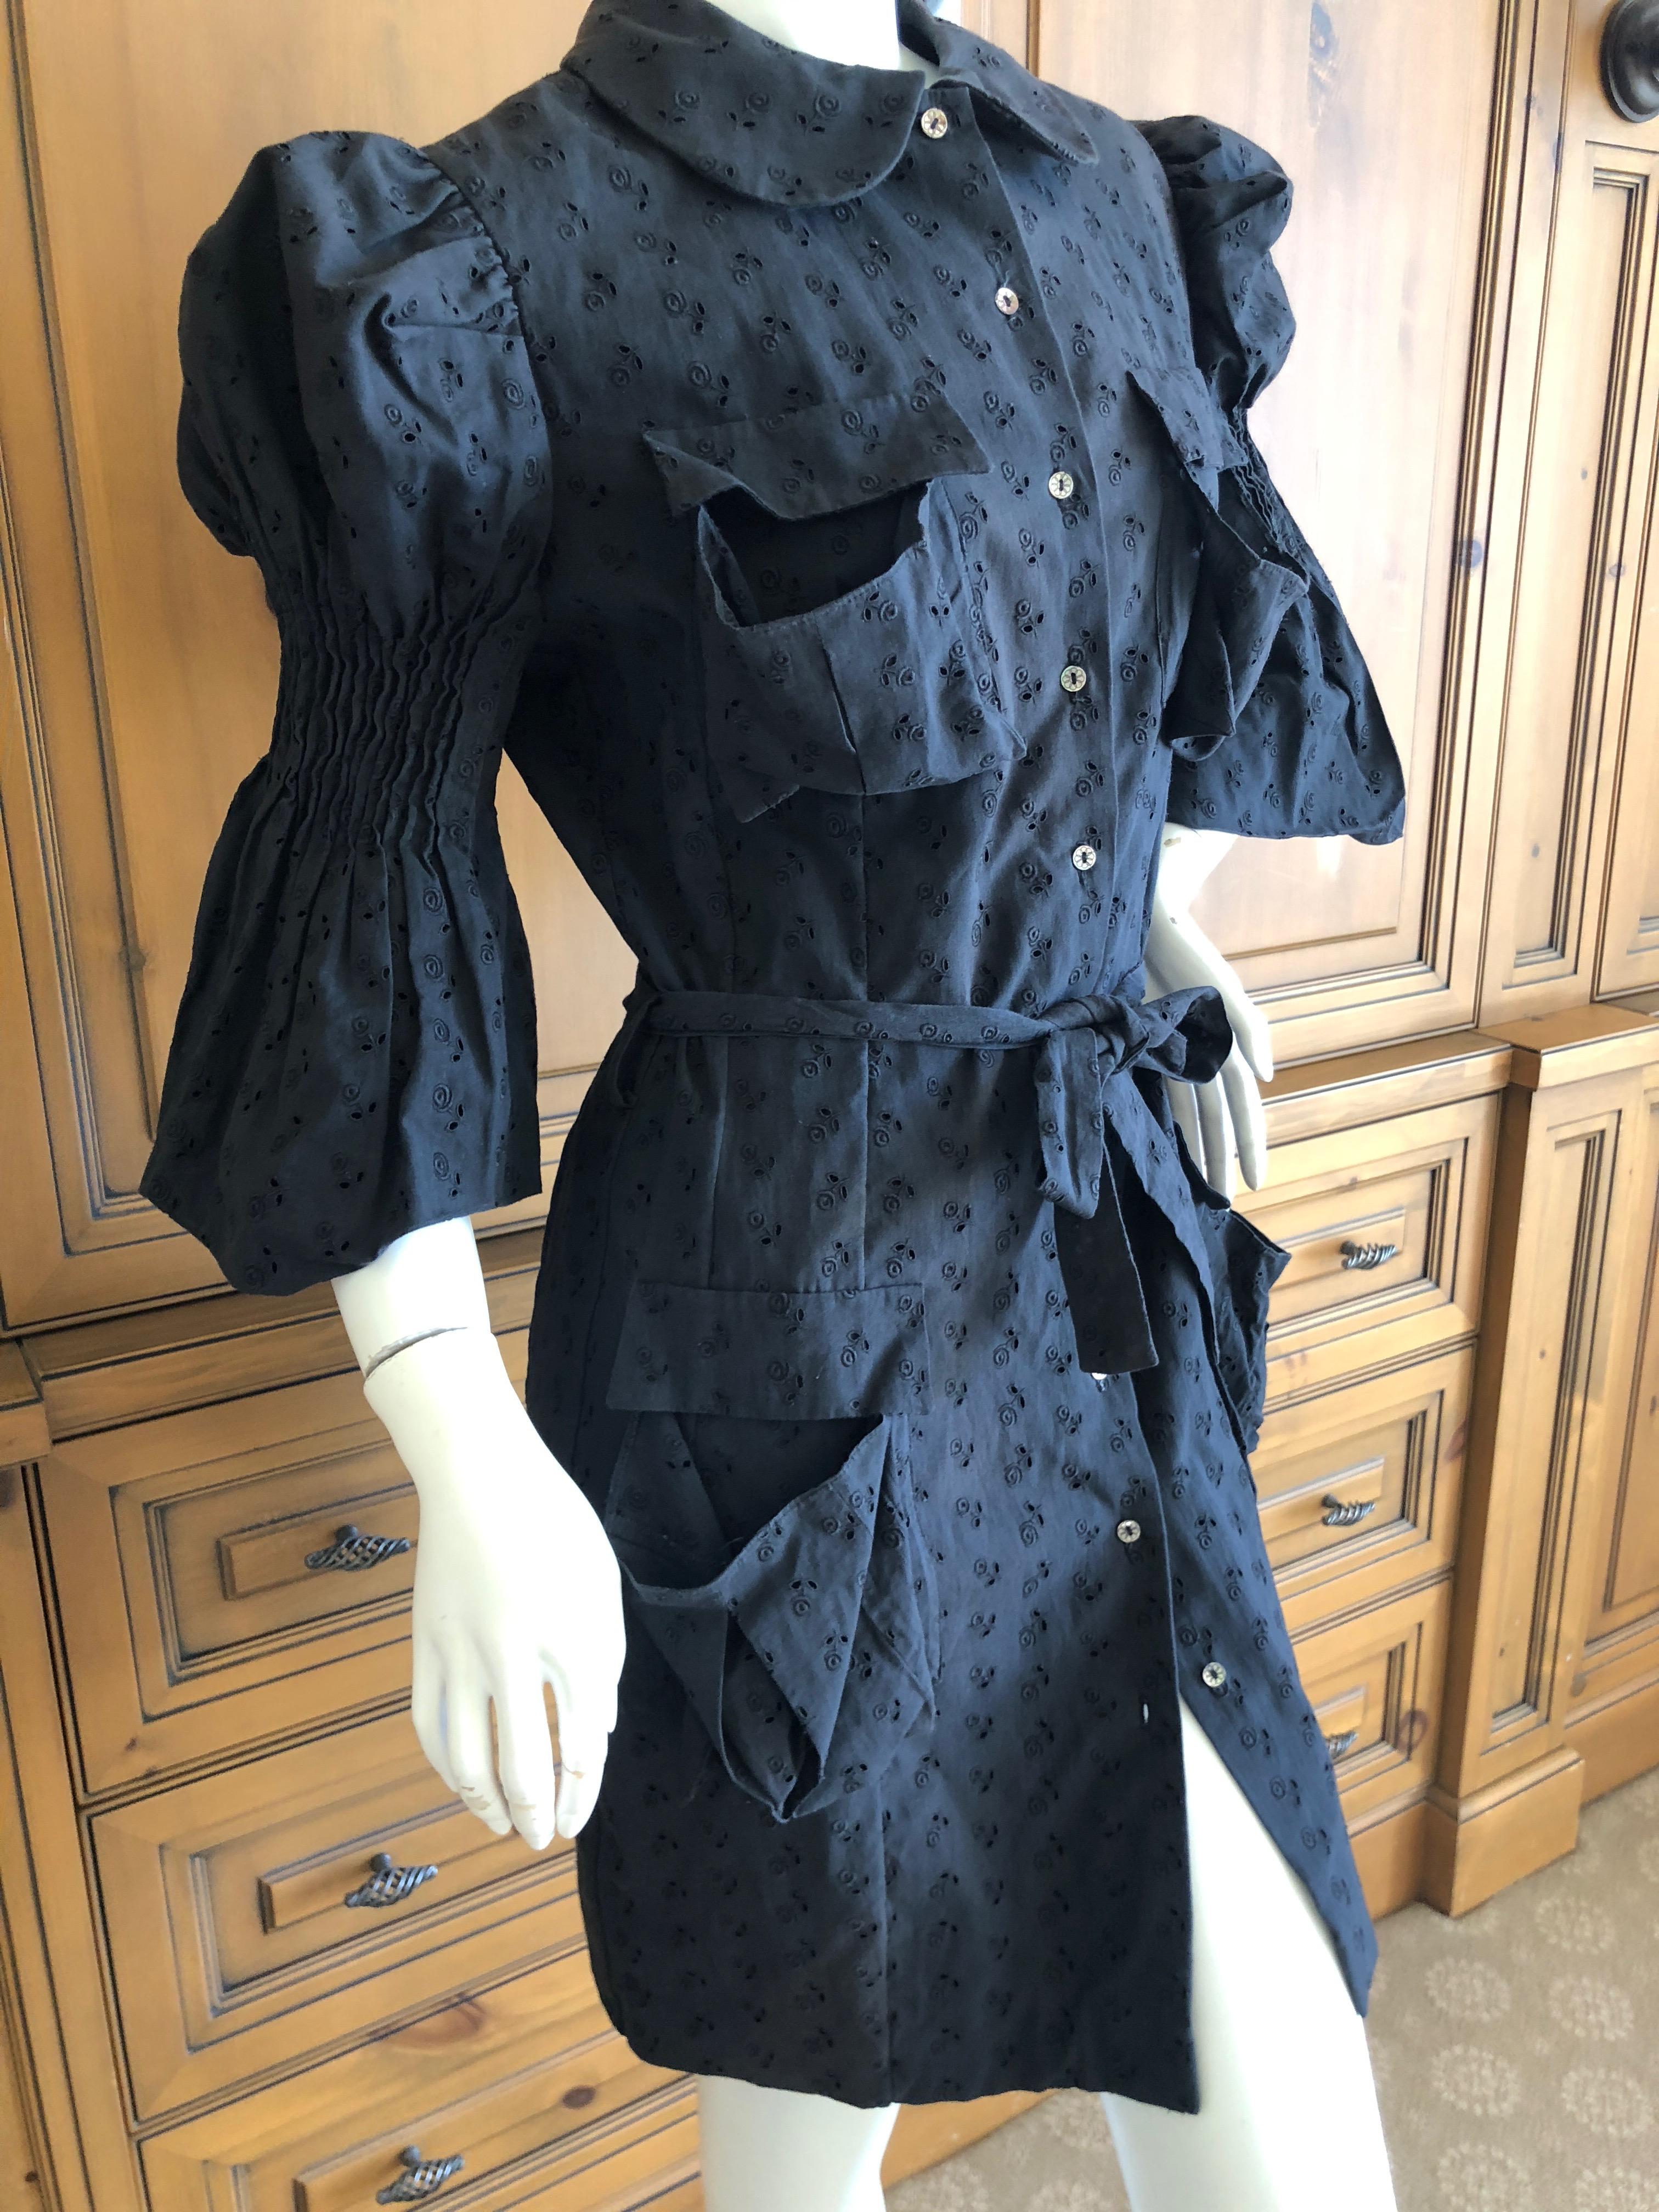  John Galliano 1998 Black Belted Cotton Eyelet Dress with Leg of Mutton Sleeves 2